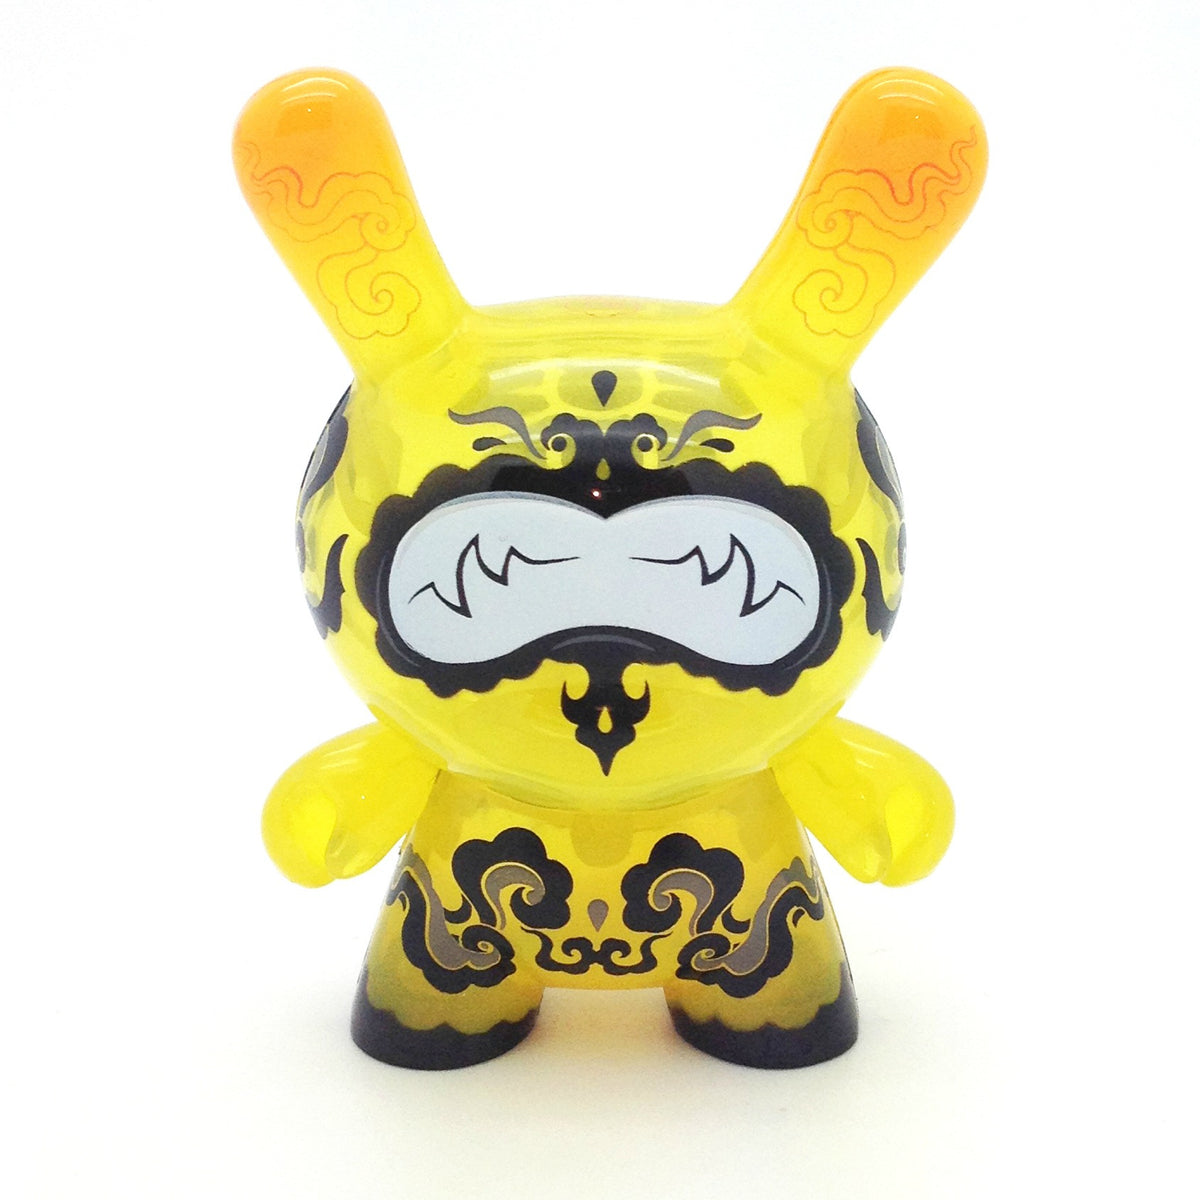 Lemon Drop Dunny by Andrew Bell - Mindzai
 - 1